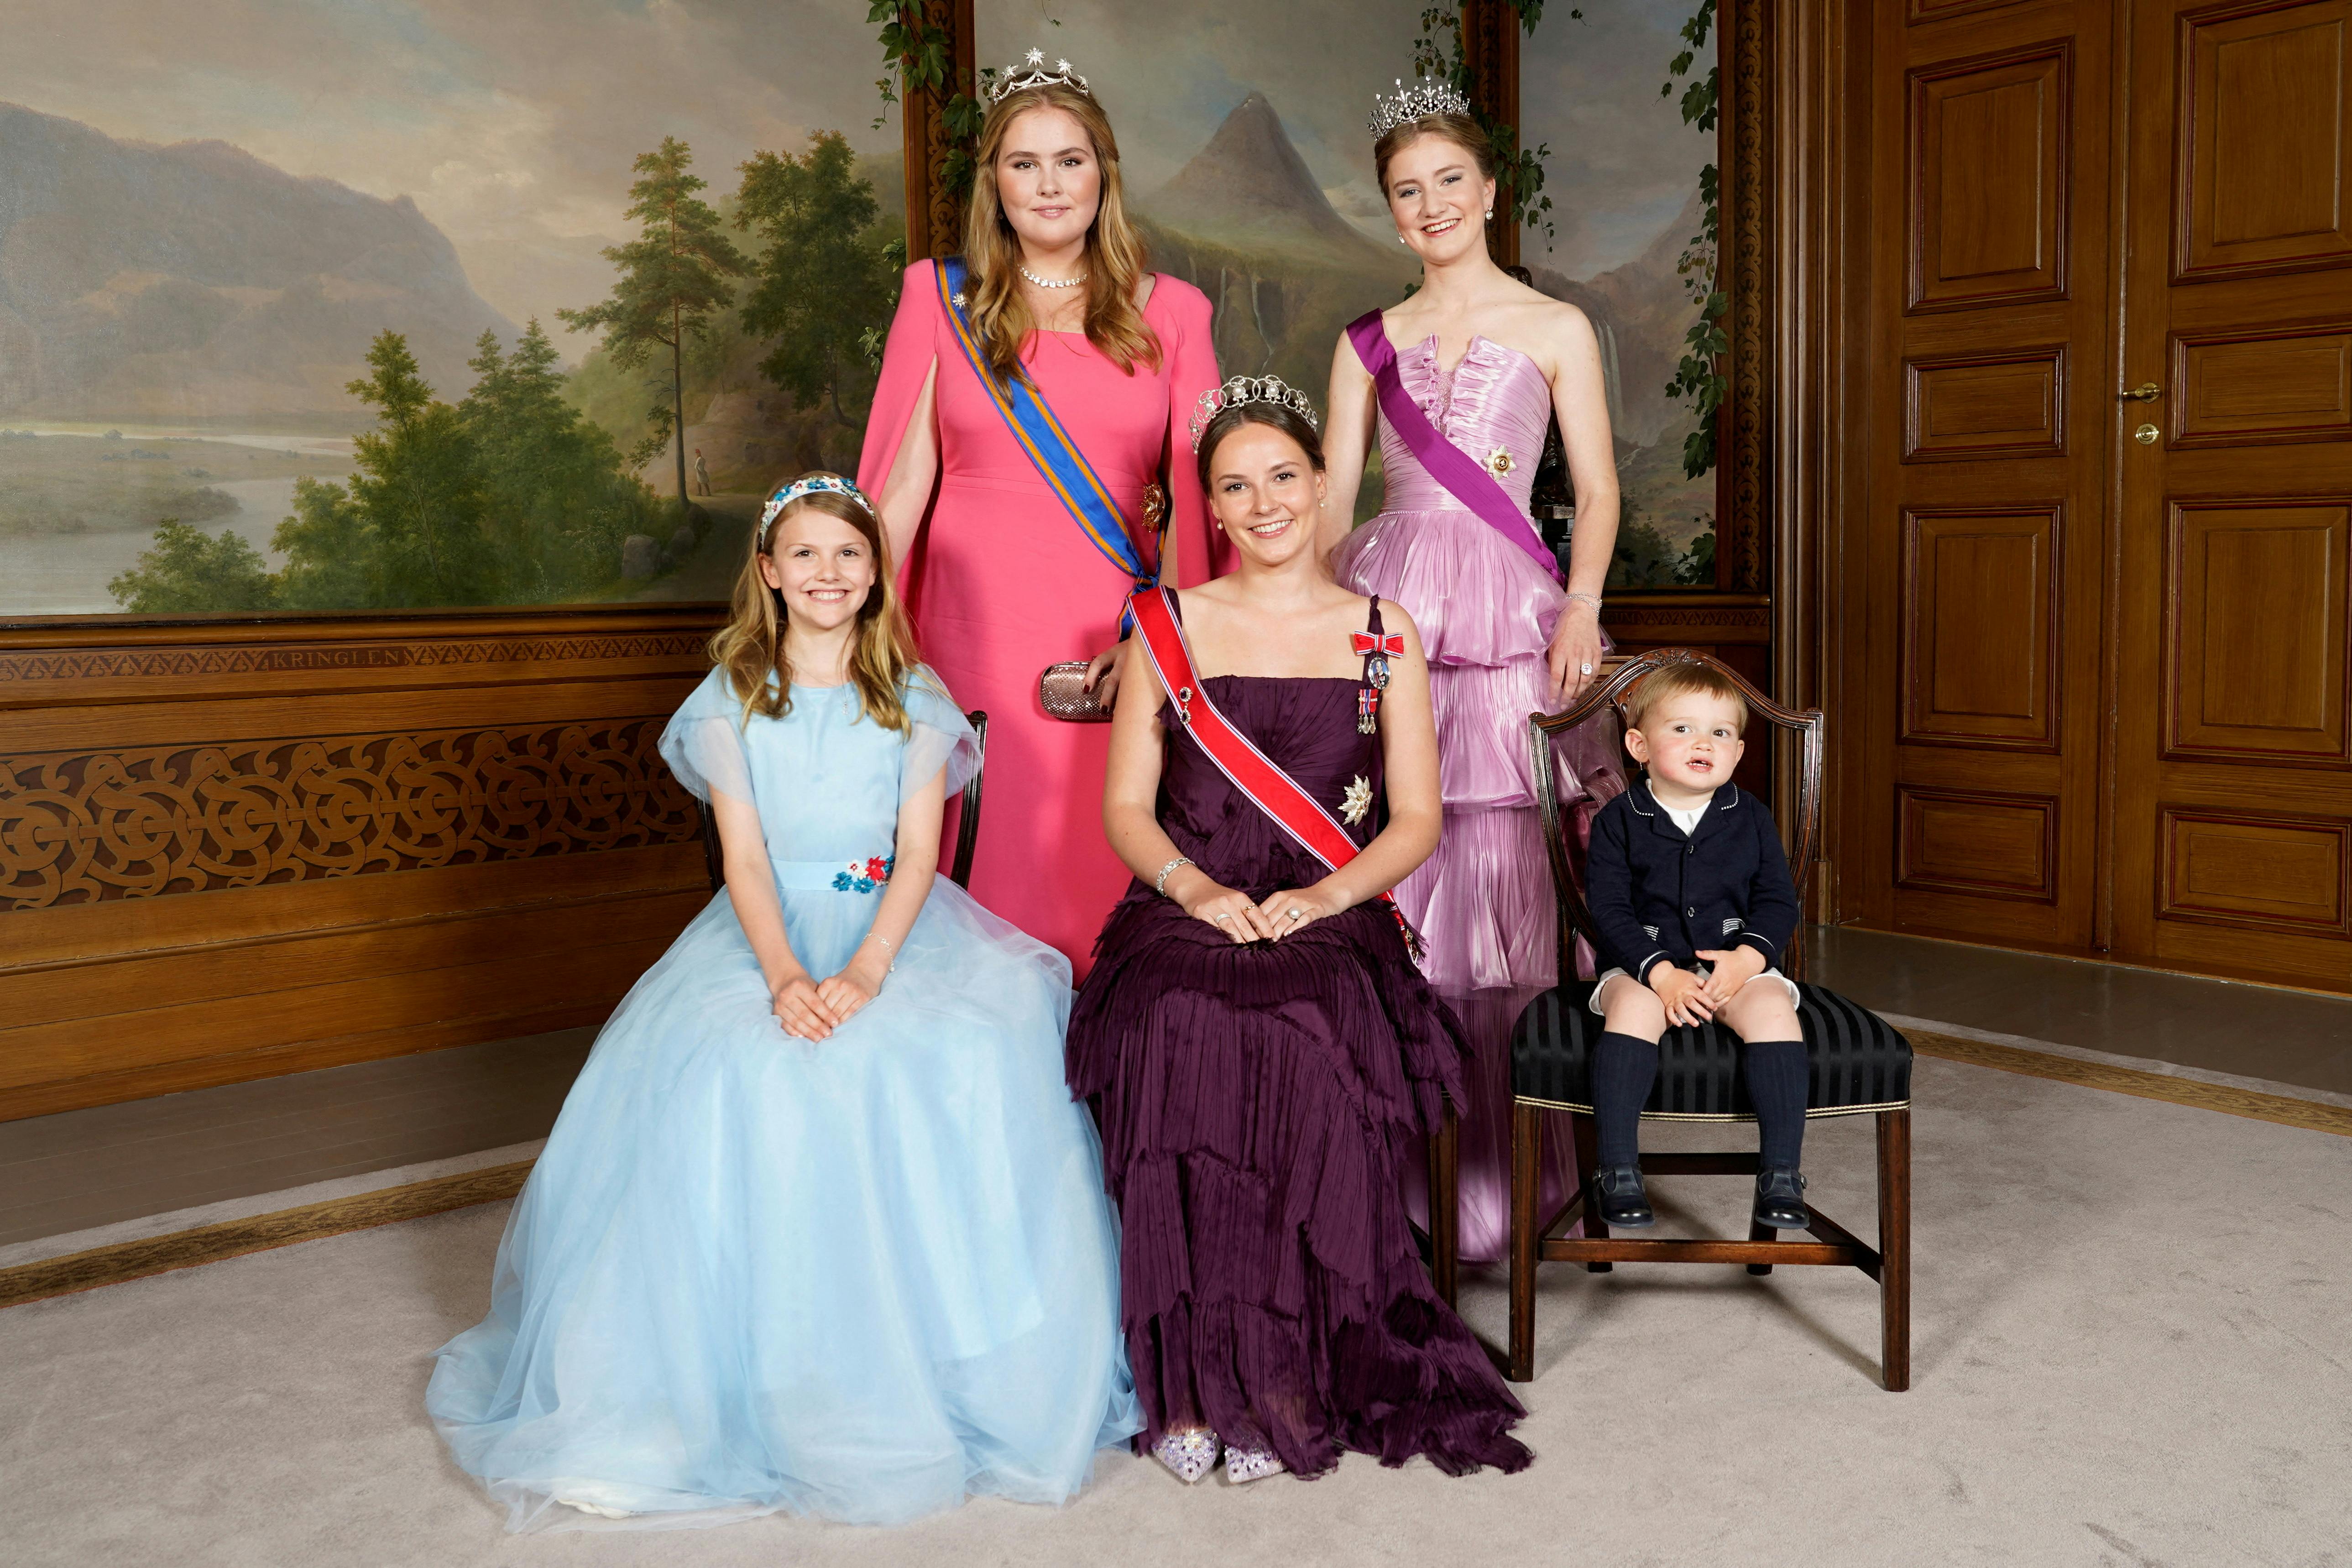 In front from left: Princess Estelle from Sweden, Princess Ingrid Alexandra and Prince Charles of Luxembourg. Behind is Princess Catharina-Amalia from Netherlands and Princess Elisabeth from Belgium. Heirs to the throne gathered at the castle before the celebration of Princess Ingrid Alexandra's 18th birthday, in Oslo, Norway, June 17, 2022. Lise Aaserud /POOL NTB/via REUTERS ATTENTION EDITORS - THIS IMAGE WAS PROVIDED BY A THIRD PARTY. NORWAY OUT.NO COMMERCIAL OR EDITORIAL SALES IN NORWAY.